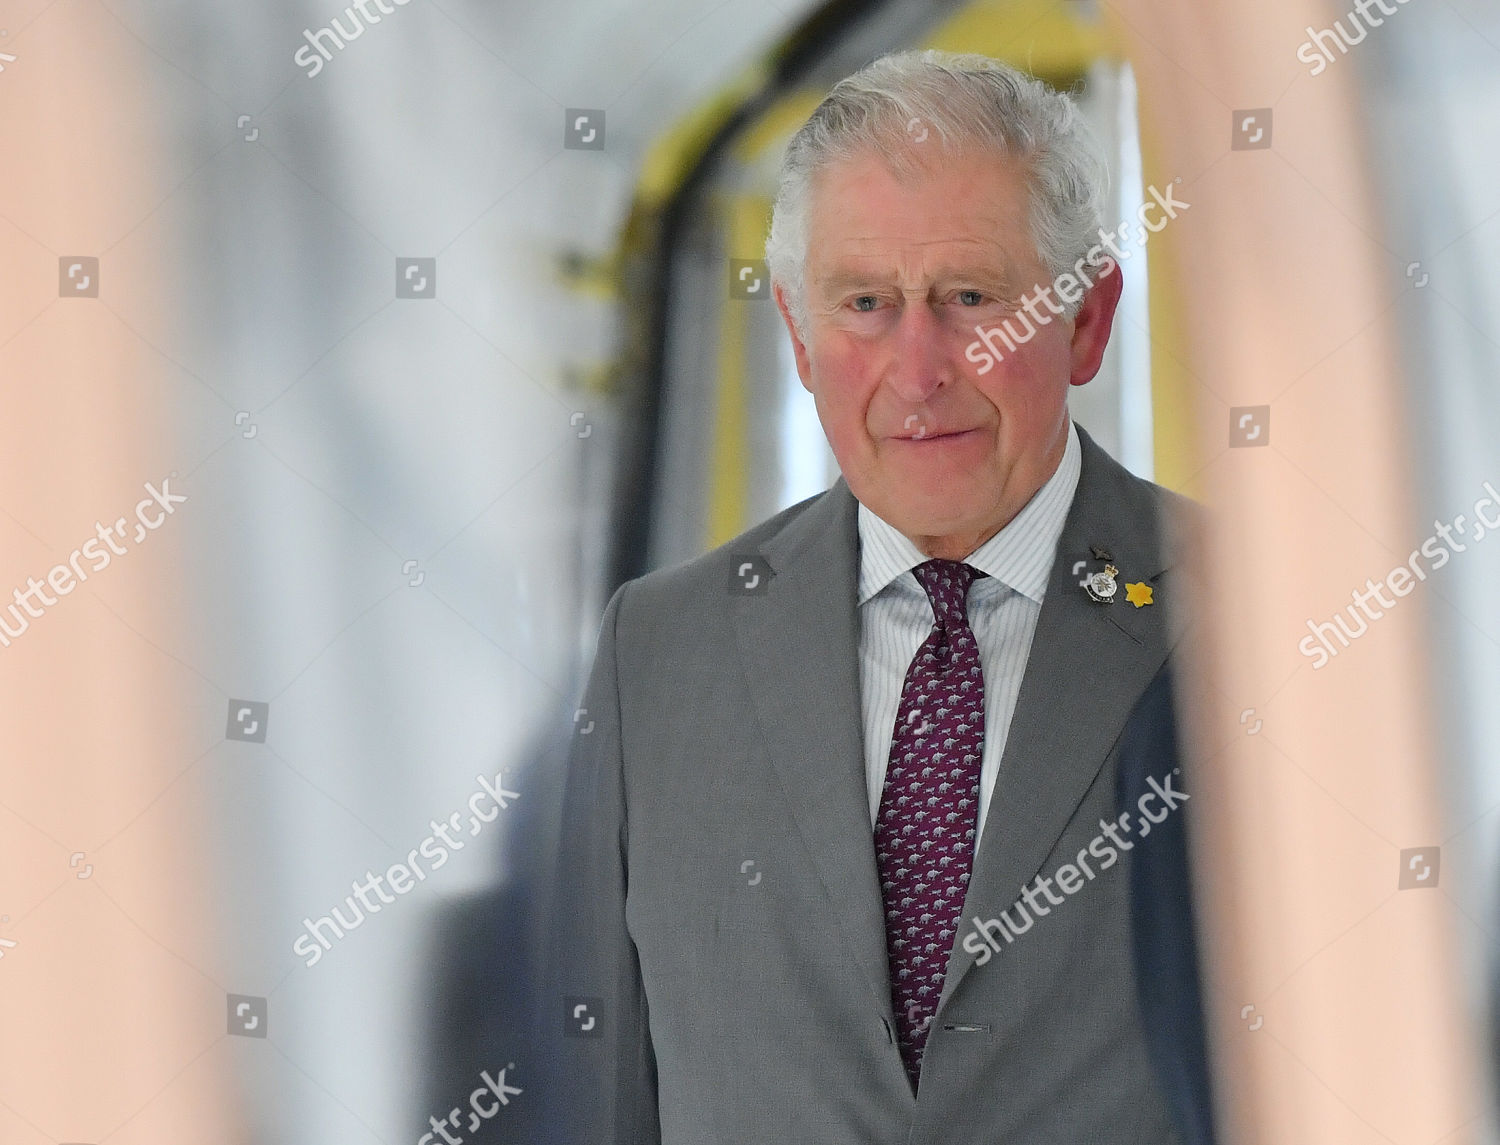 prince-charles-visit-to-south-wales-uk-shutterstock-editorial-10563131b.jpg